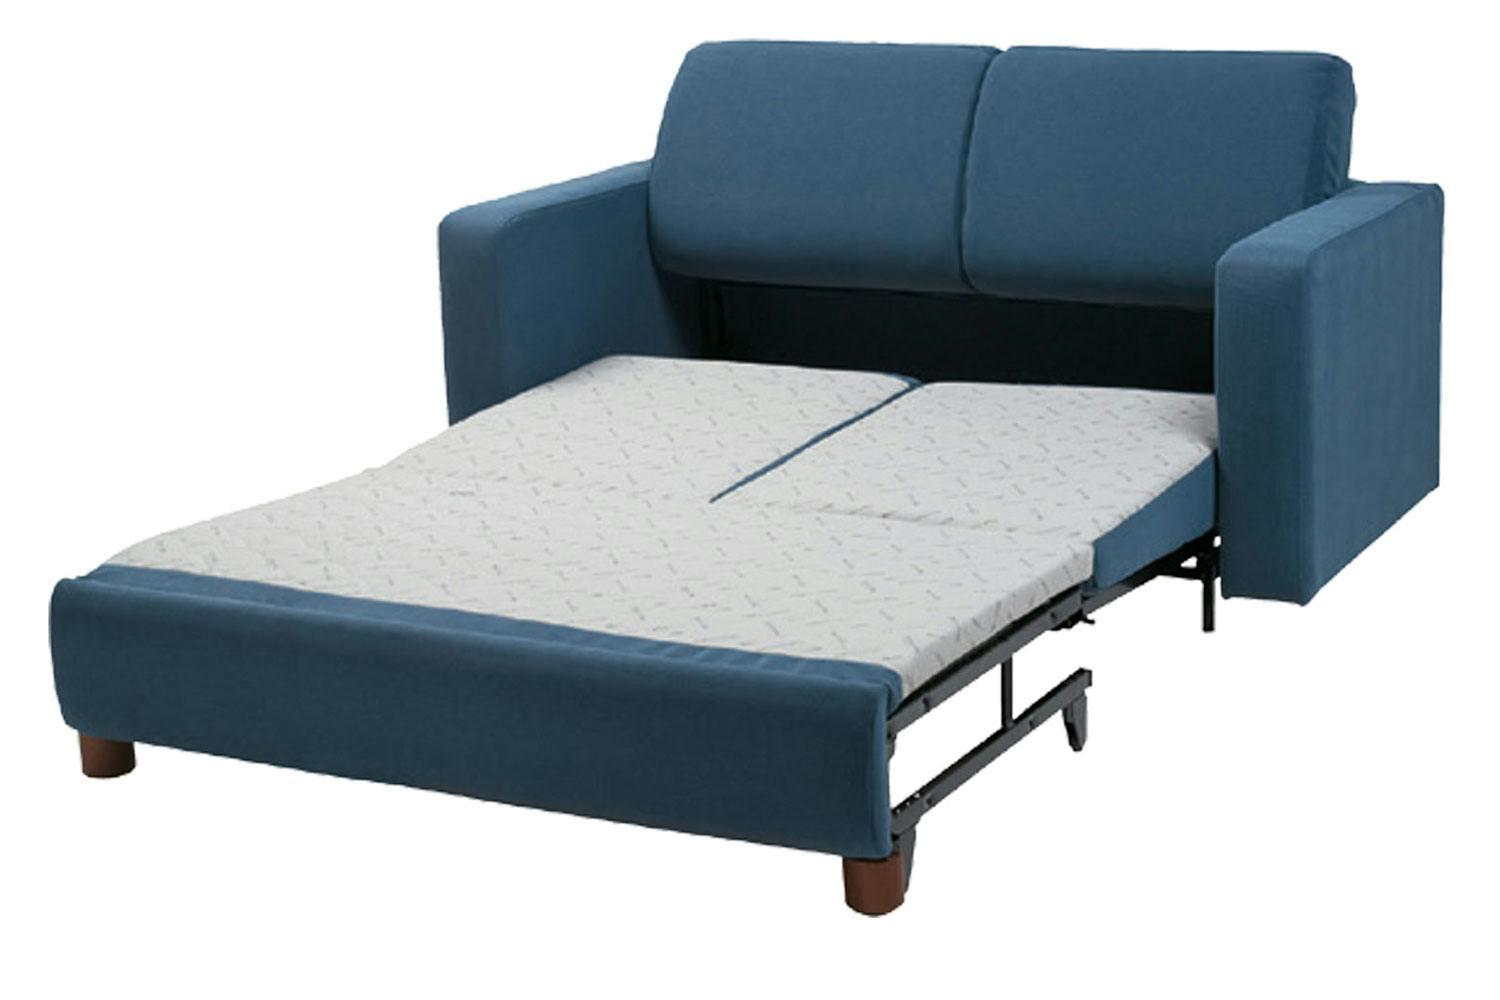 Single Sofa Bed Chair Nz / Opera Sofa Designed For Small Spaces Lounge